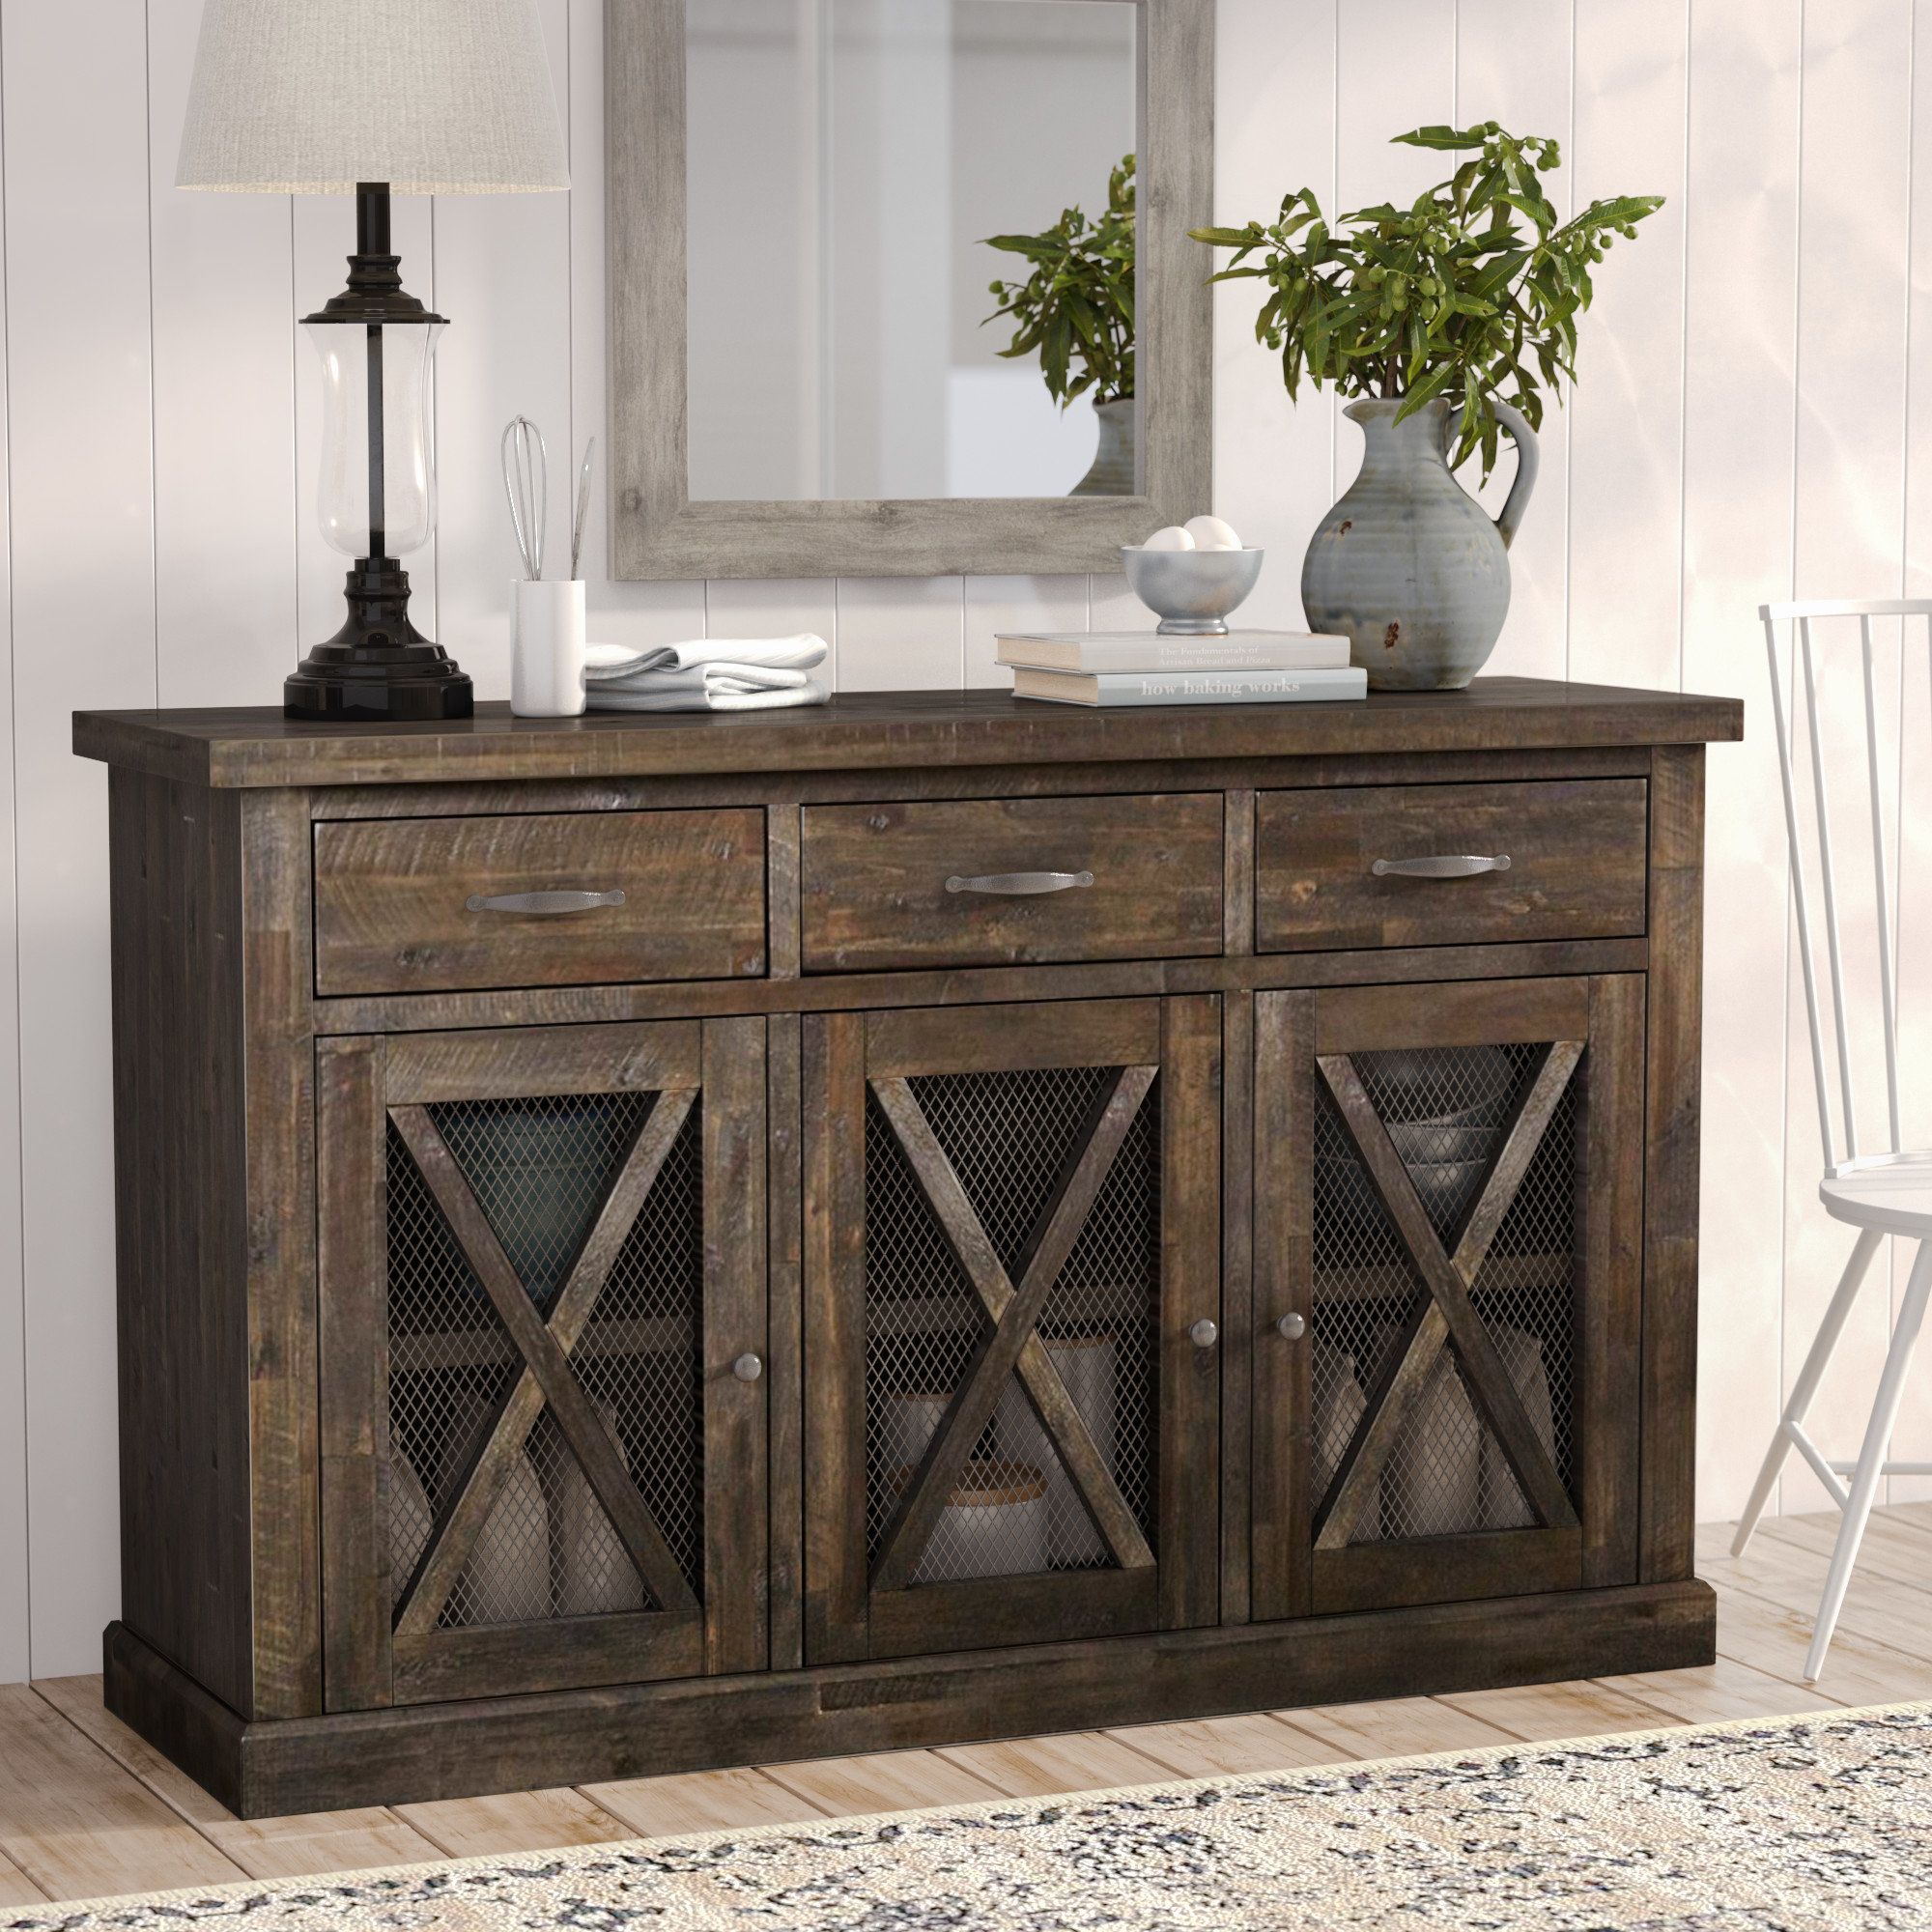 Colborne Sideboard With Most Recently Released Avenal Sideboards (View 6 of 20)